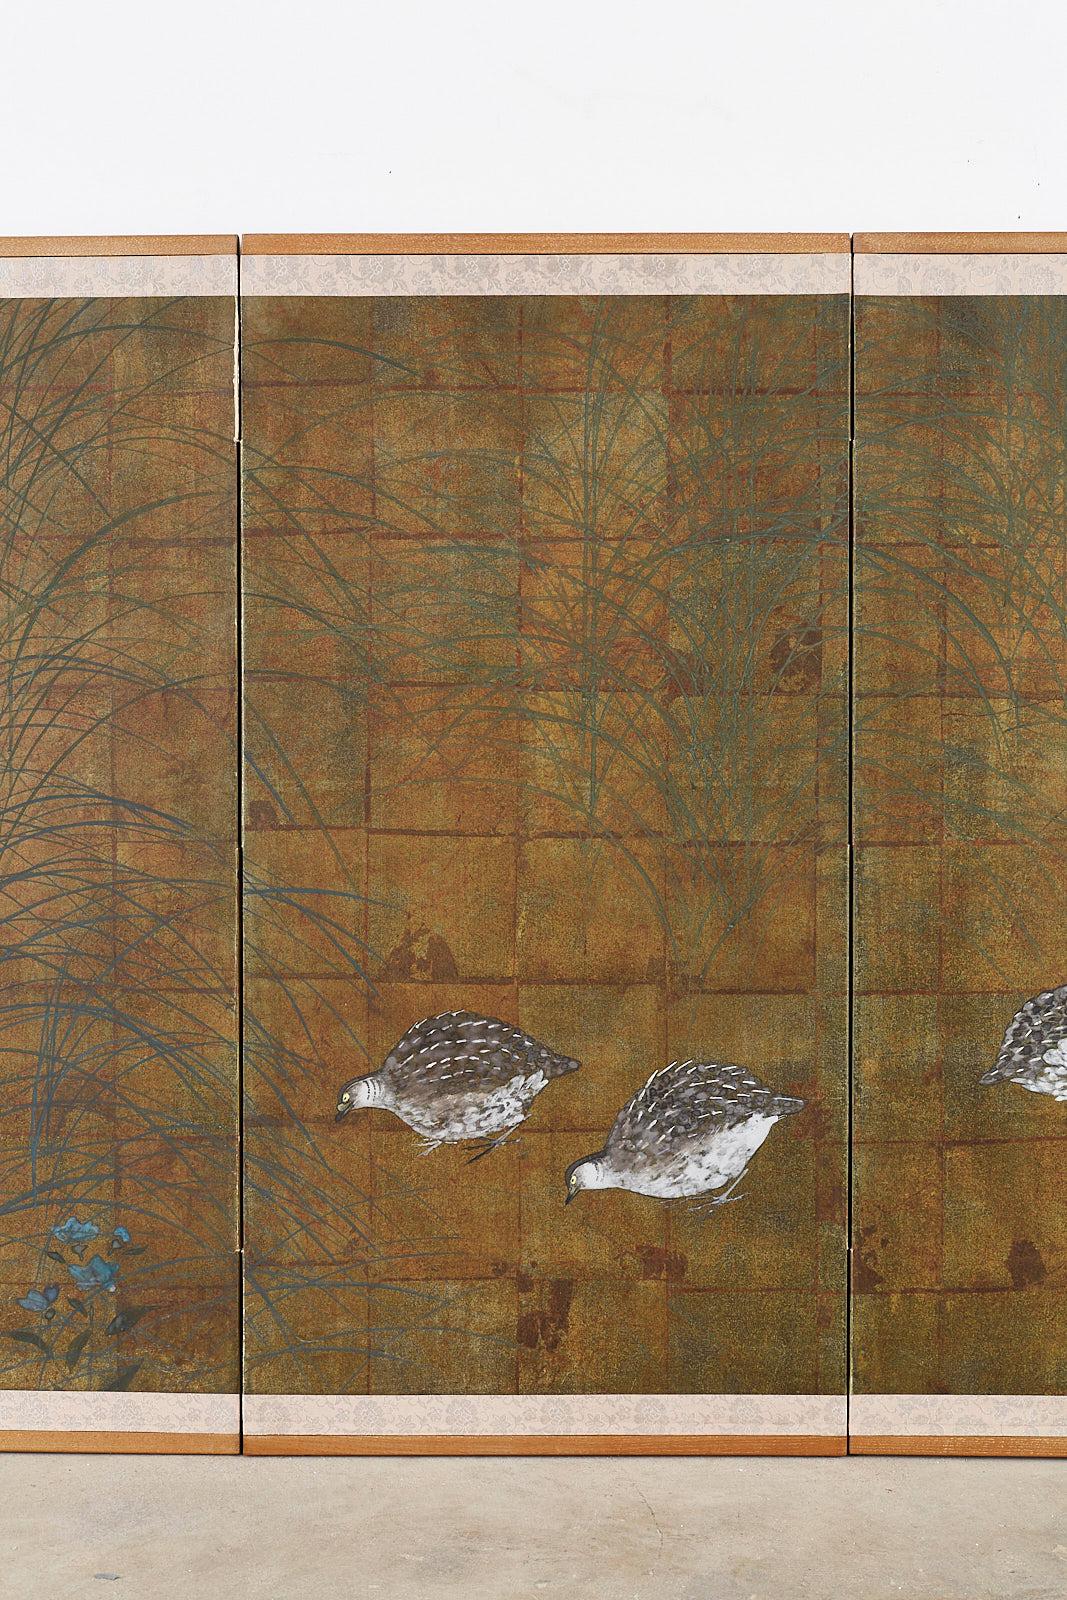 Hand-Crafted Japanese Four-Panel Screen Quail in Autumn Landscape